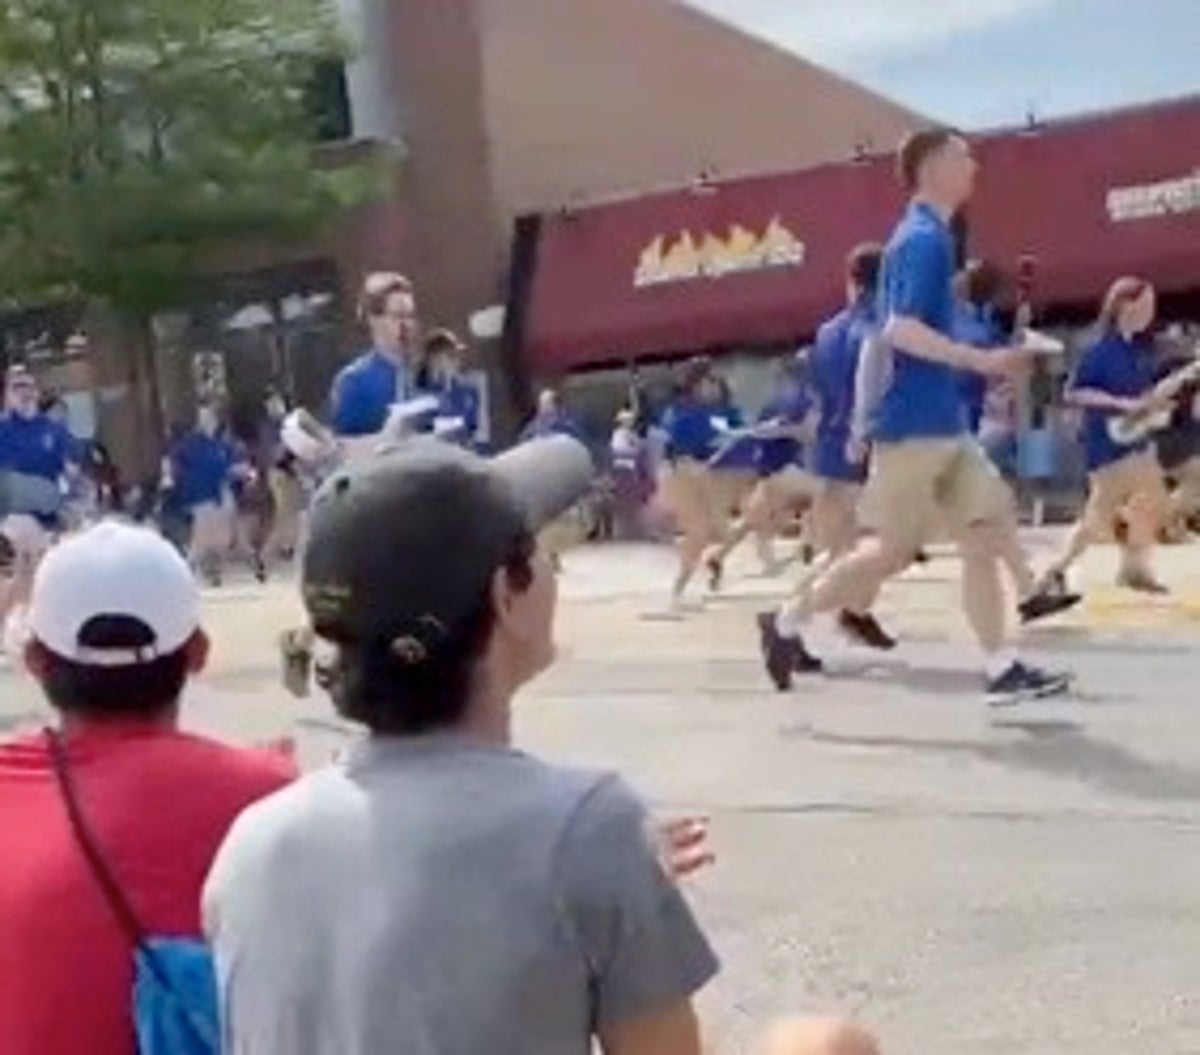 Active shooting situation at July 4 parade in Illinois with ‘multiple’ people shot